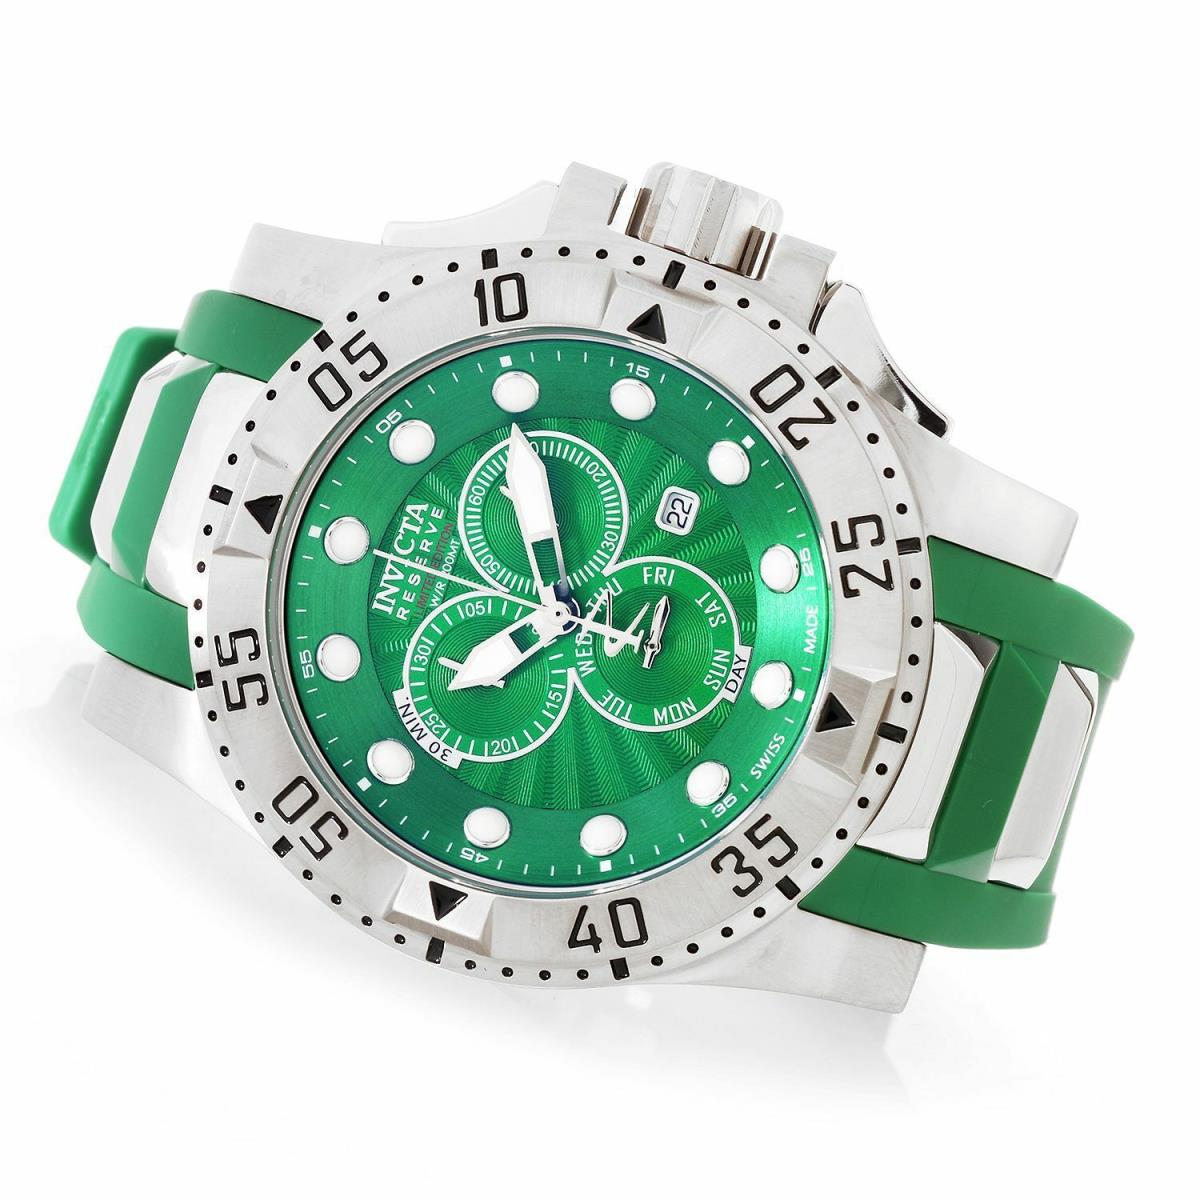 Mens Invicta 18687 Excursion Swiss Made Chronograph Green Watch - GREEN